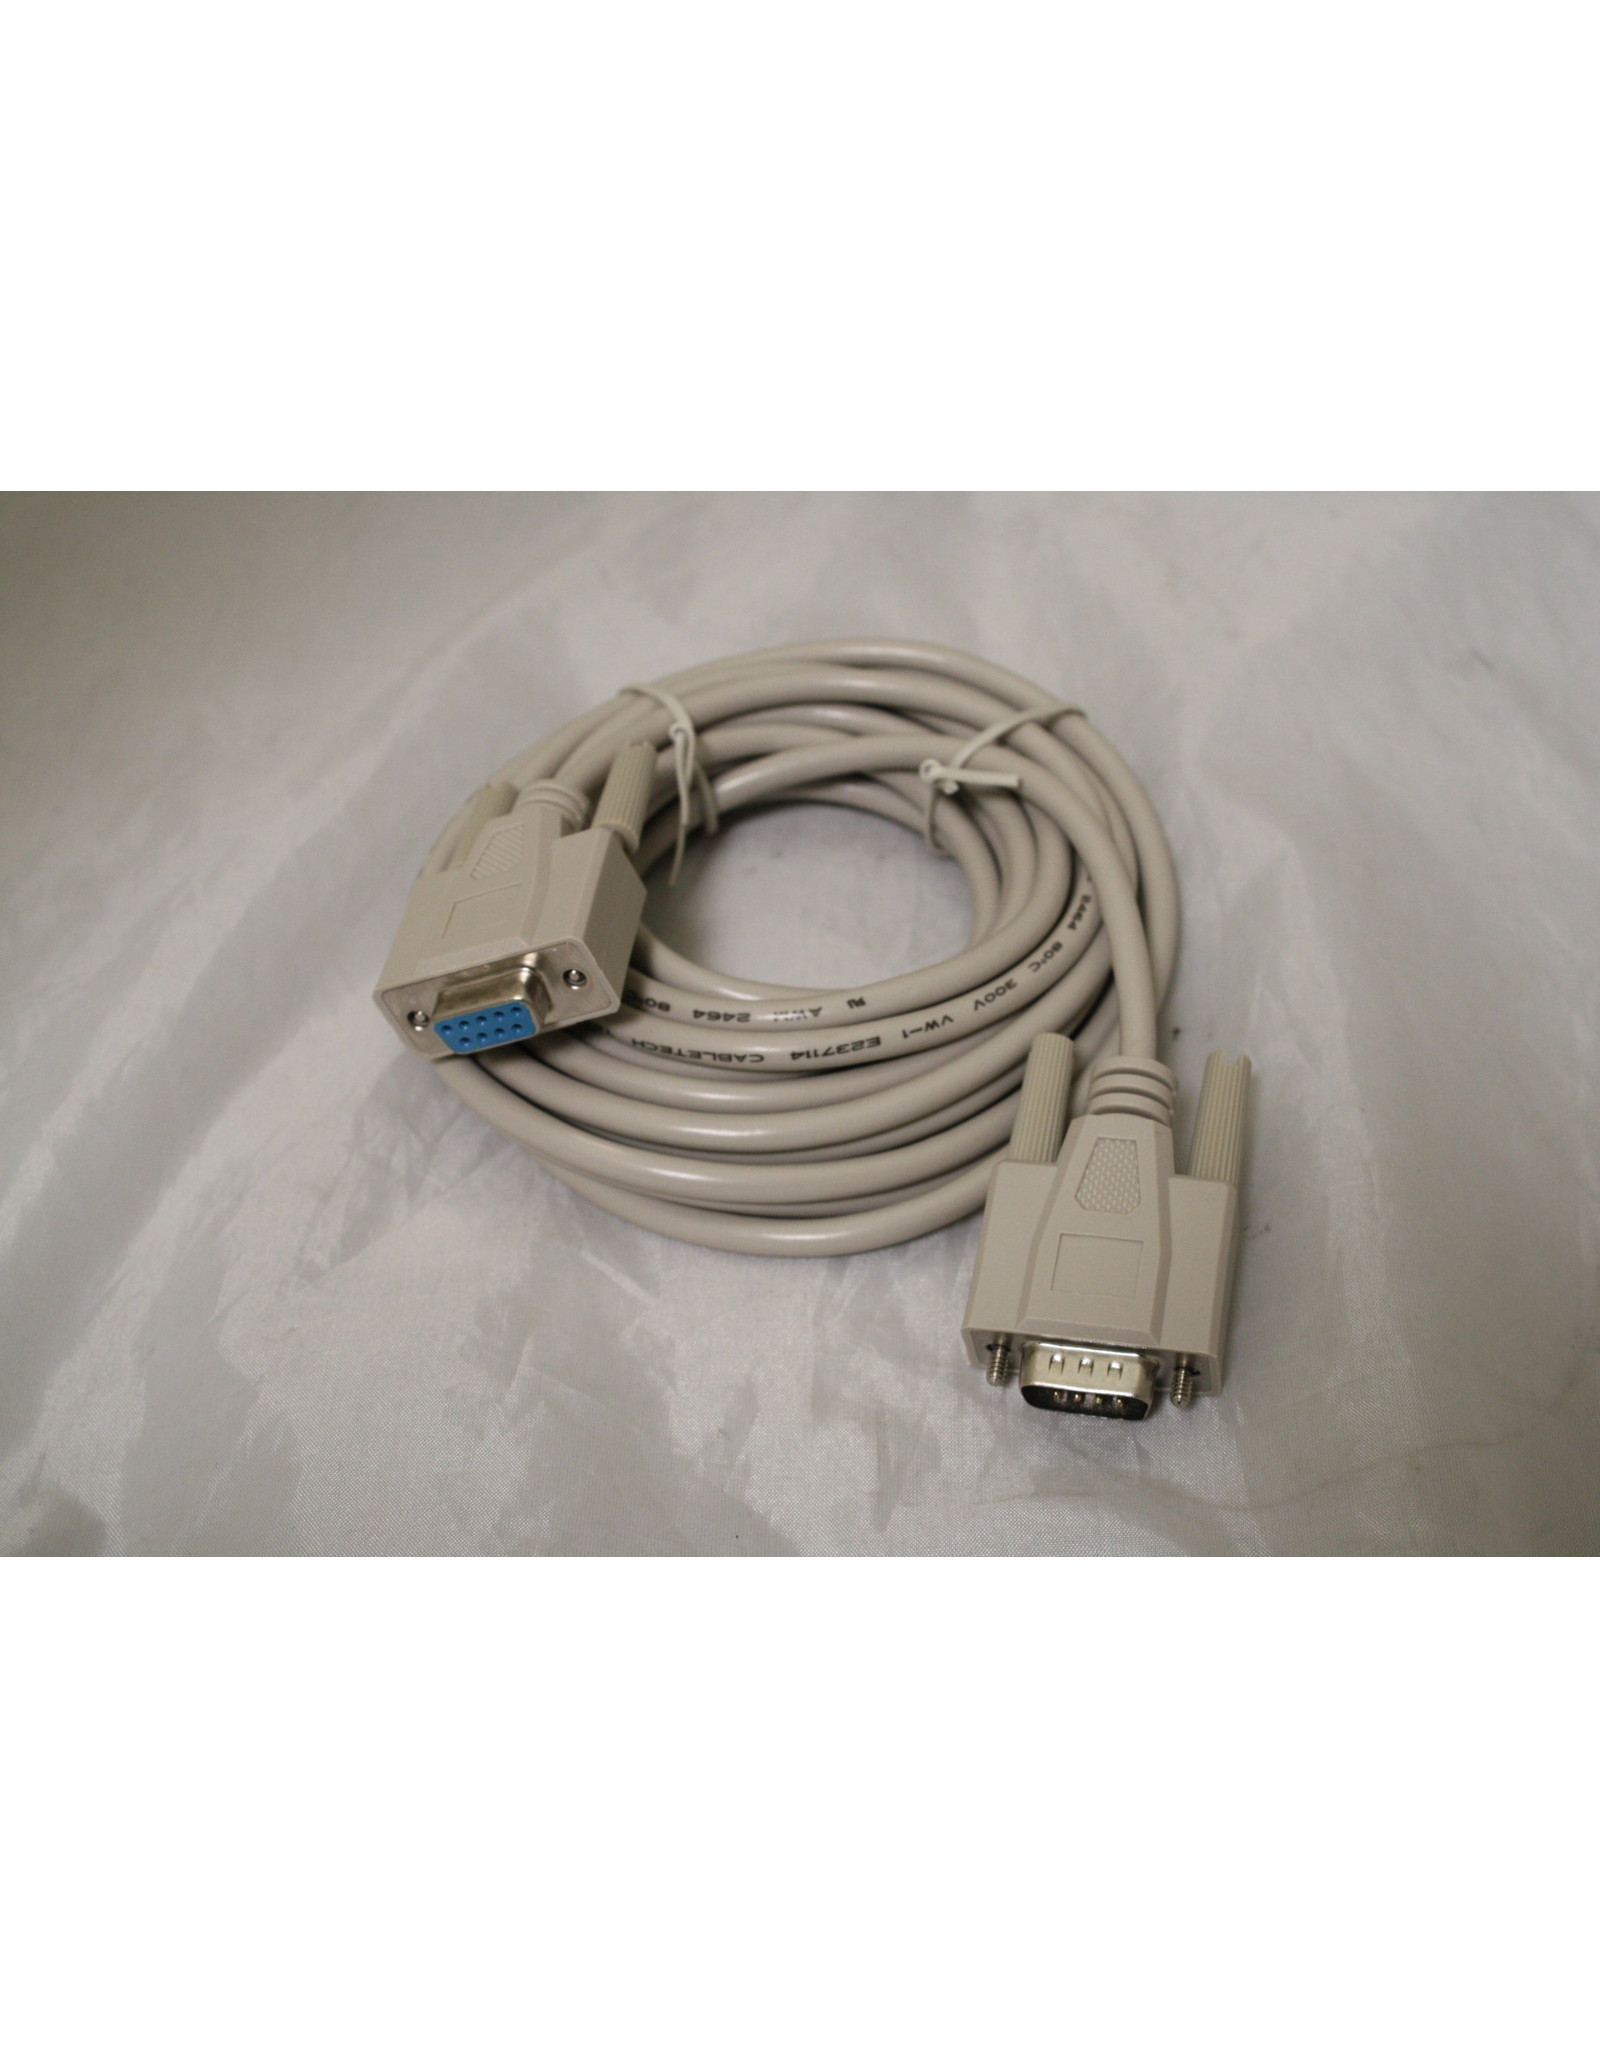 Astro-Physics Astro-Physics Serial Cable 15 foot straight through